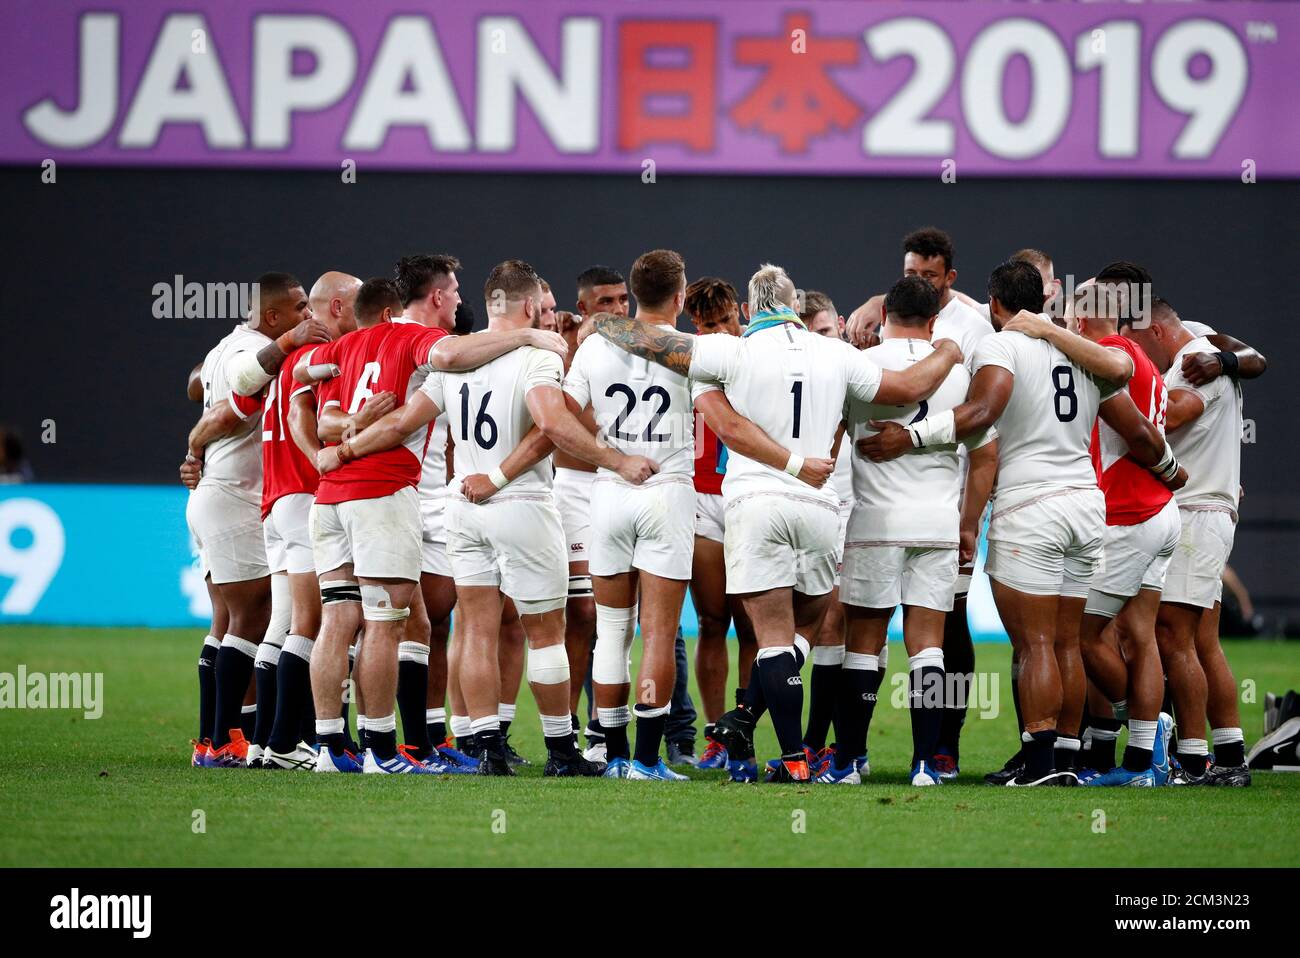 Rugby Union Coupe Du Monde De Rugby 19 Pool C Angleterre V Tonga Sapporo Dome Sapporo Japon 22 Septembre 19 Angleterre Et Tonga Joueurs Apres Le Match Reuters Edgar Su Photo Stock Alamy